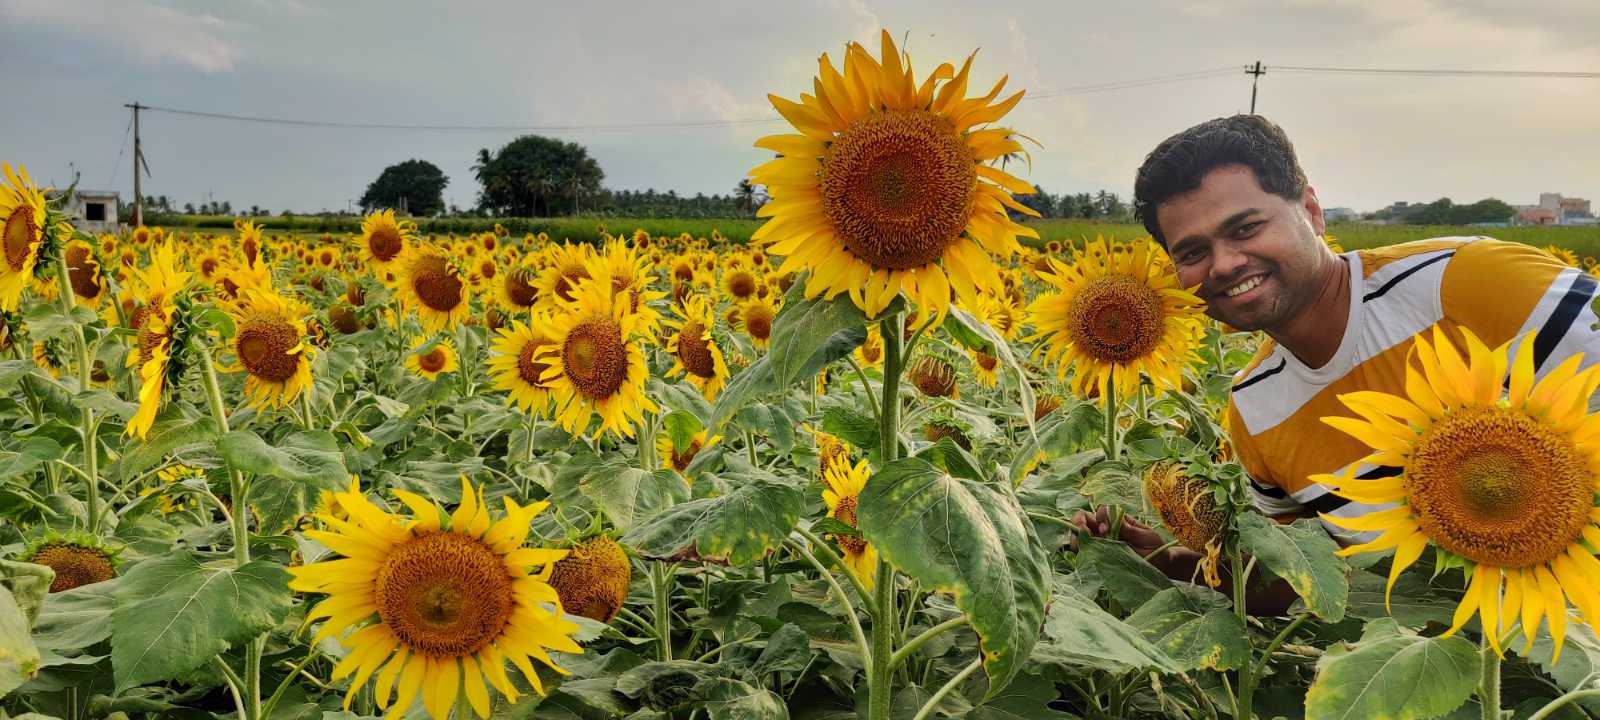 Read more about the article Sundarapandiapuram sunflower fields(Exact locations, tips)